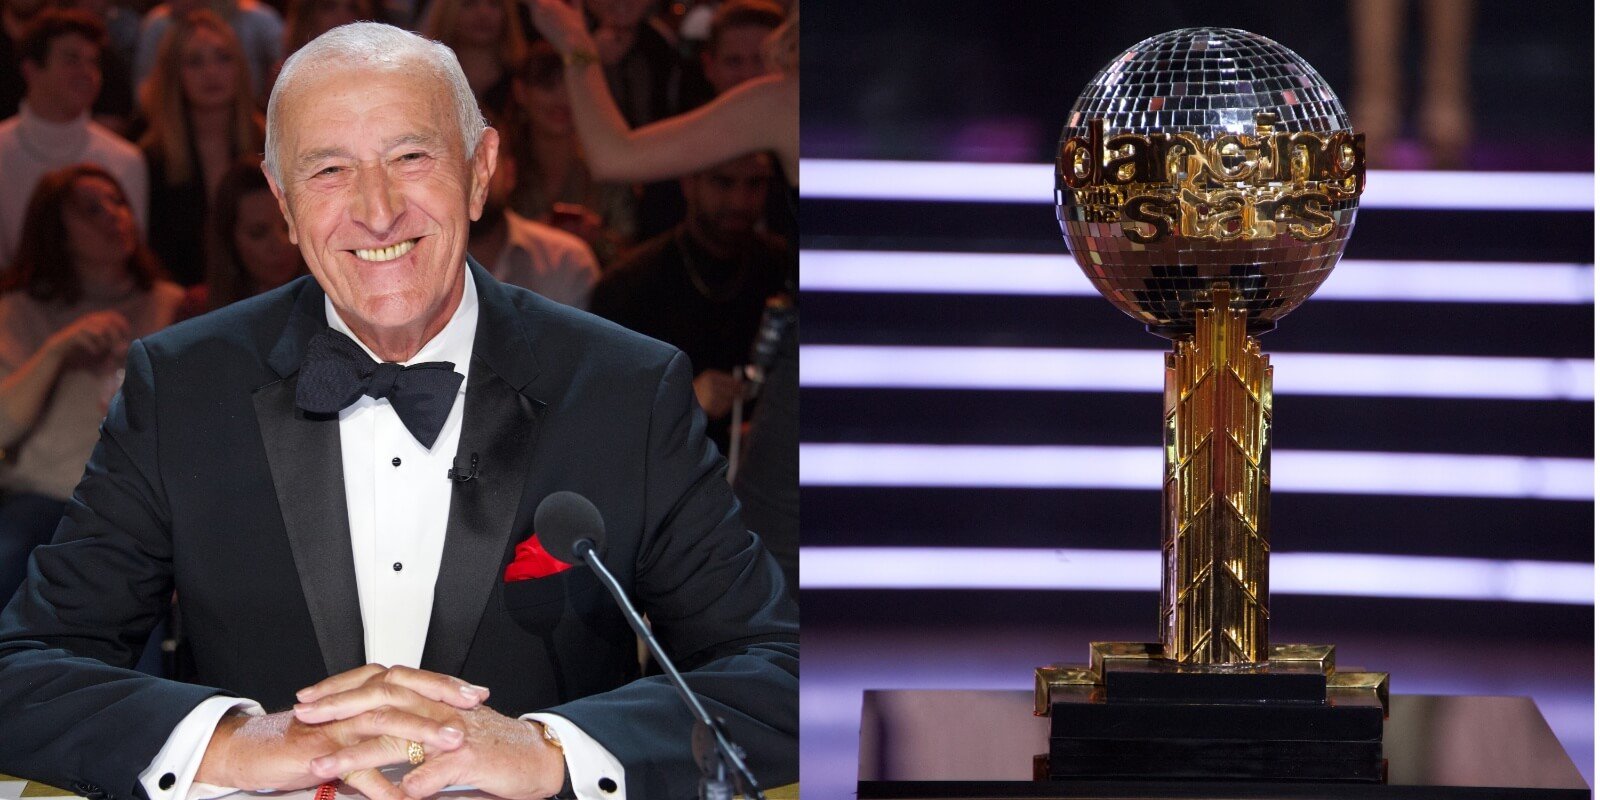 Len Goodman poses alongside a the 'Dancing With the Stars' mirrorball trophy in side-by-side photographs.